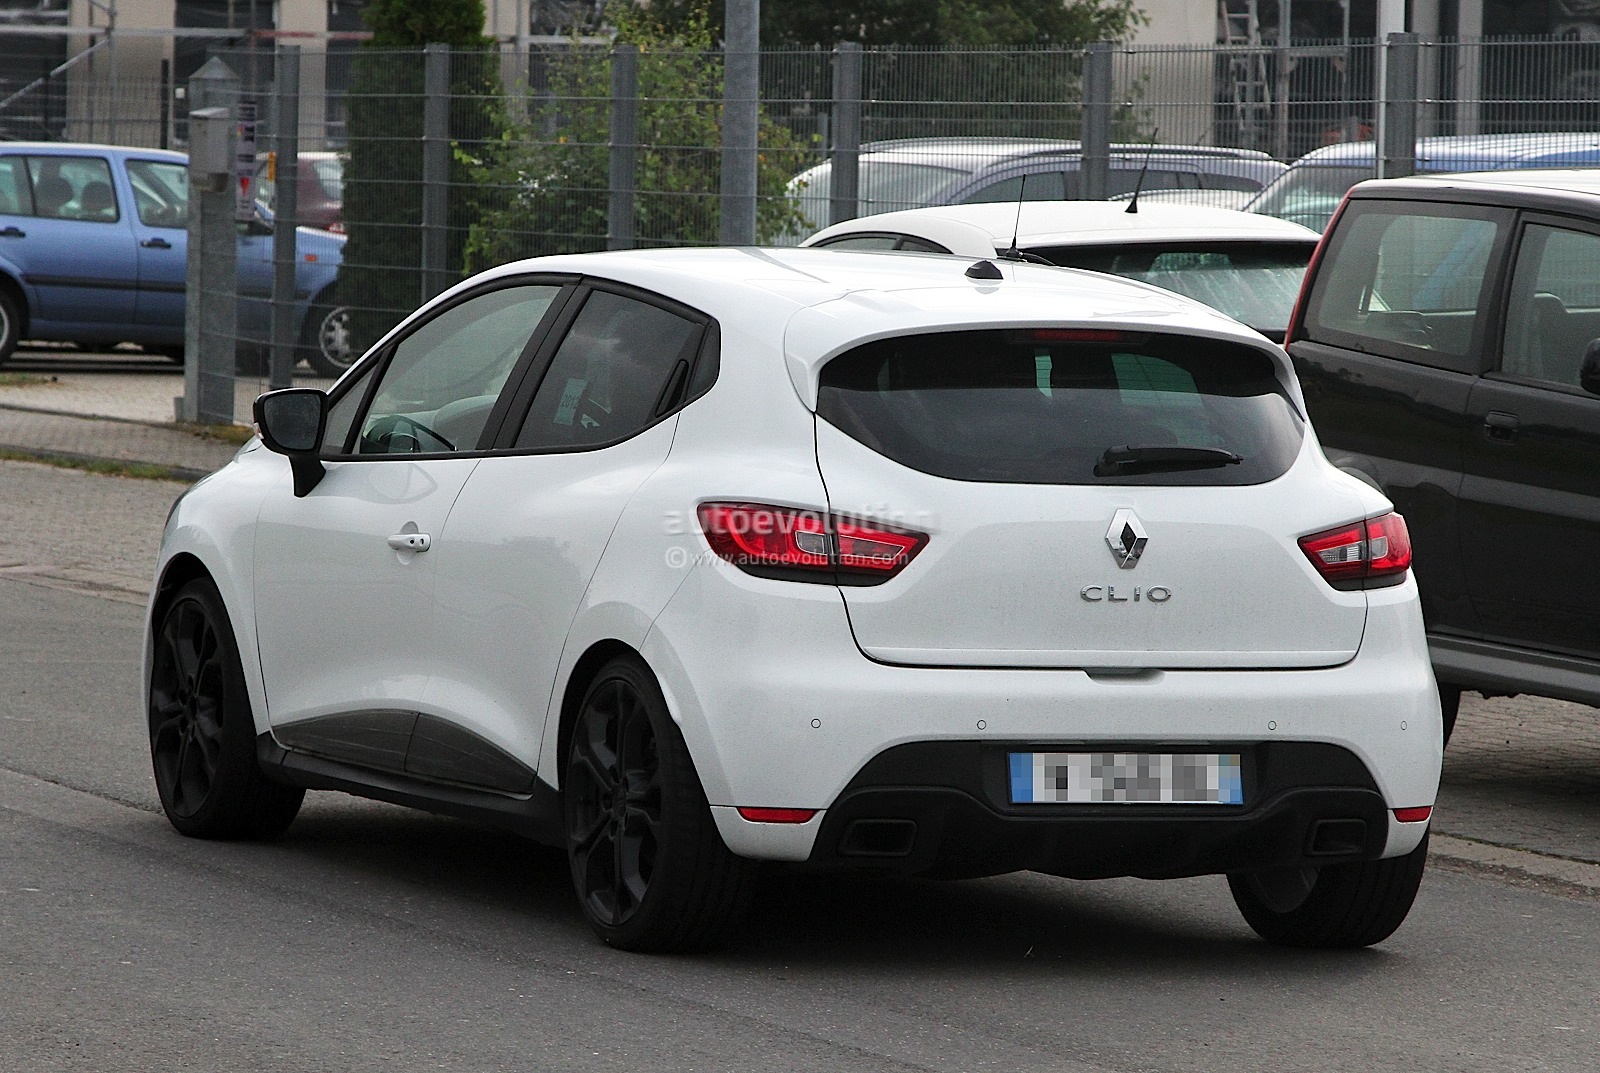 http://s1.cdn.autoevolution.com/images/news/gallery/2013-renault-clio-iv-rs-210-spotted-undisguised-in-white_6.jpg